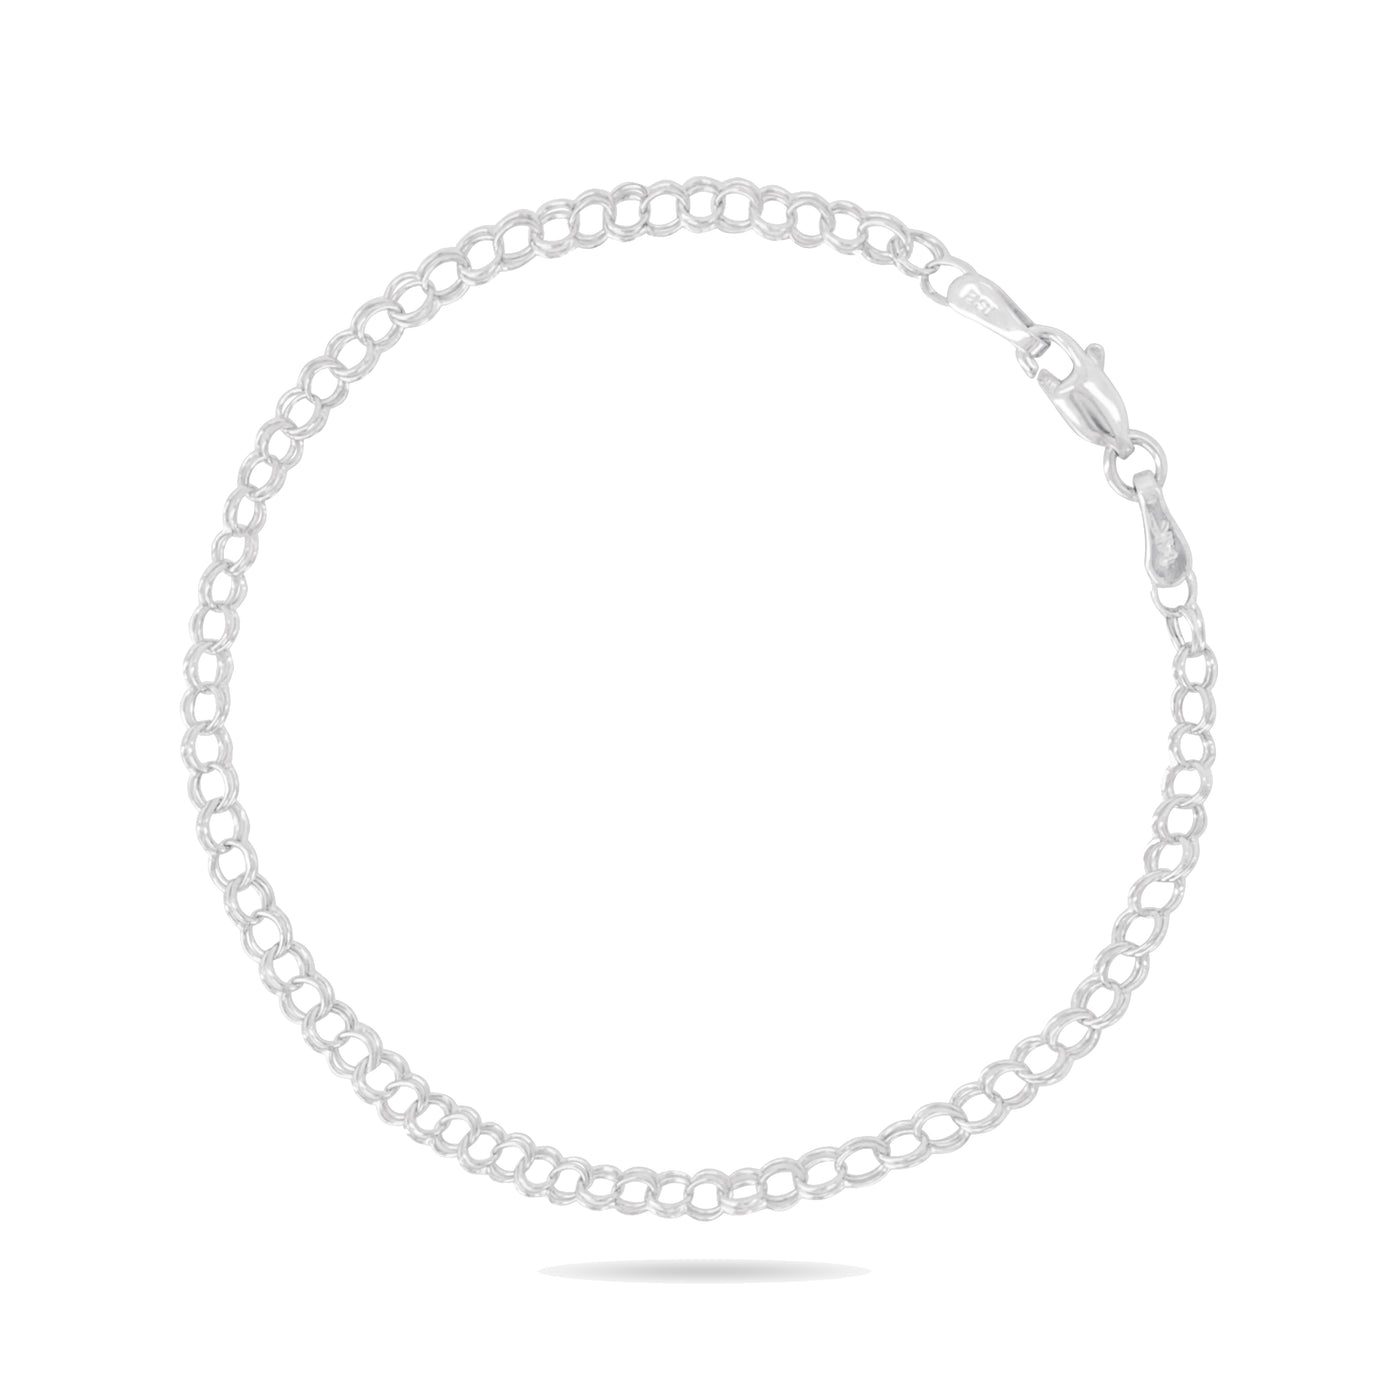 14K CHARM LINK CHAIN BRACELET IN WHITE, YELLOW, & ROSE GOLD